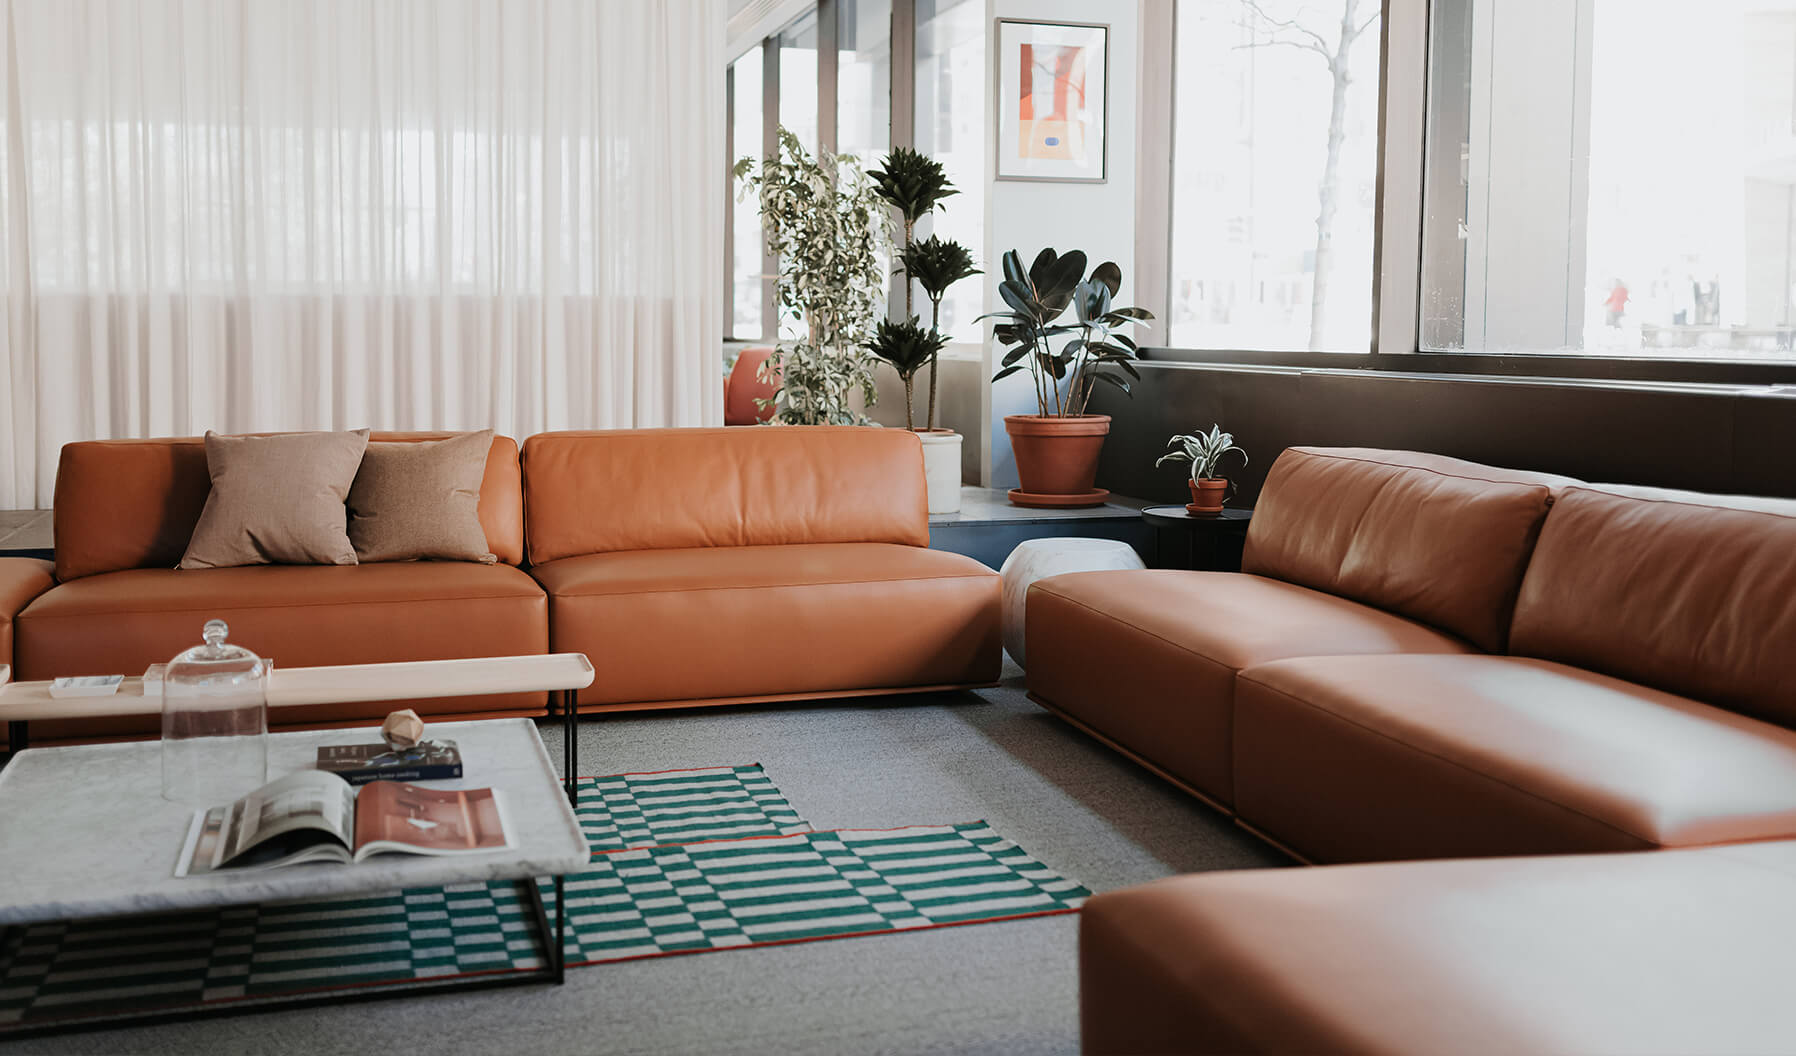 This lounge creates a Social Space that provides comfortable seating to
encourage interaction and collaboration with relaxed, seated postures.  Gan Rugs, Cassina side tables, pillows, and plants contribute to the
ambience.